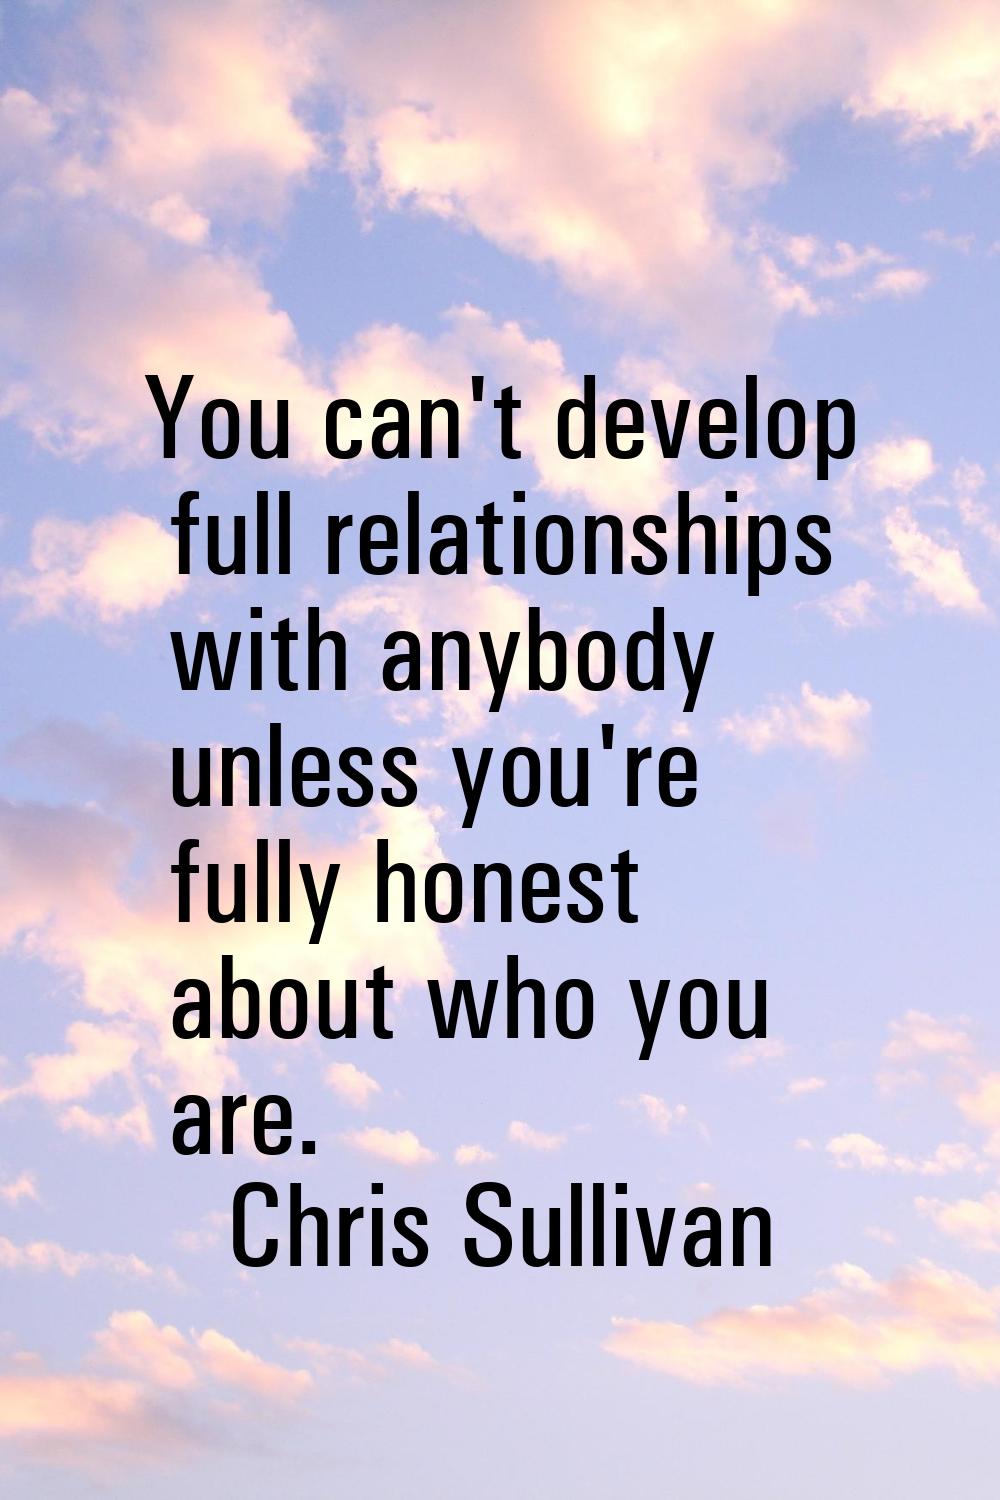 You can't develop full relationships with anybody unless you're fully honest about who you are.